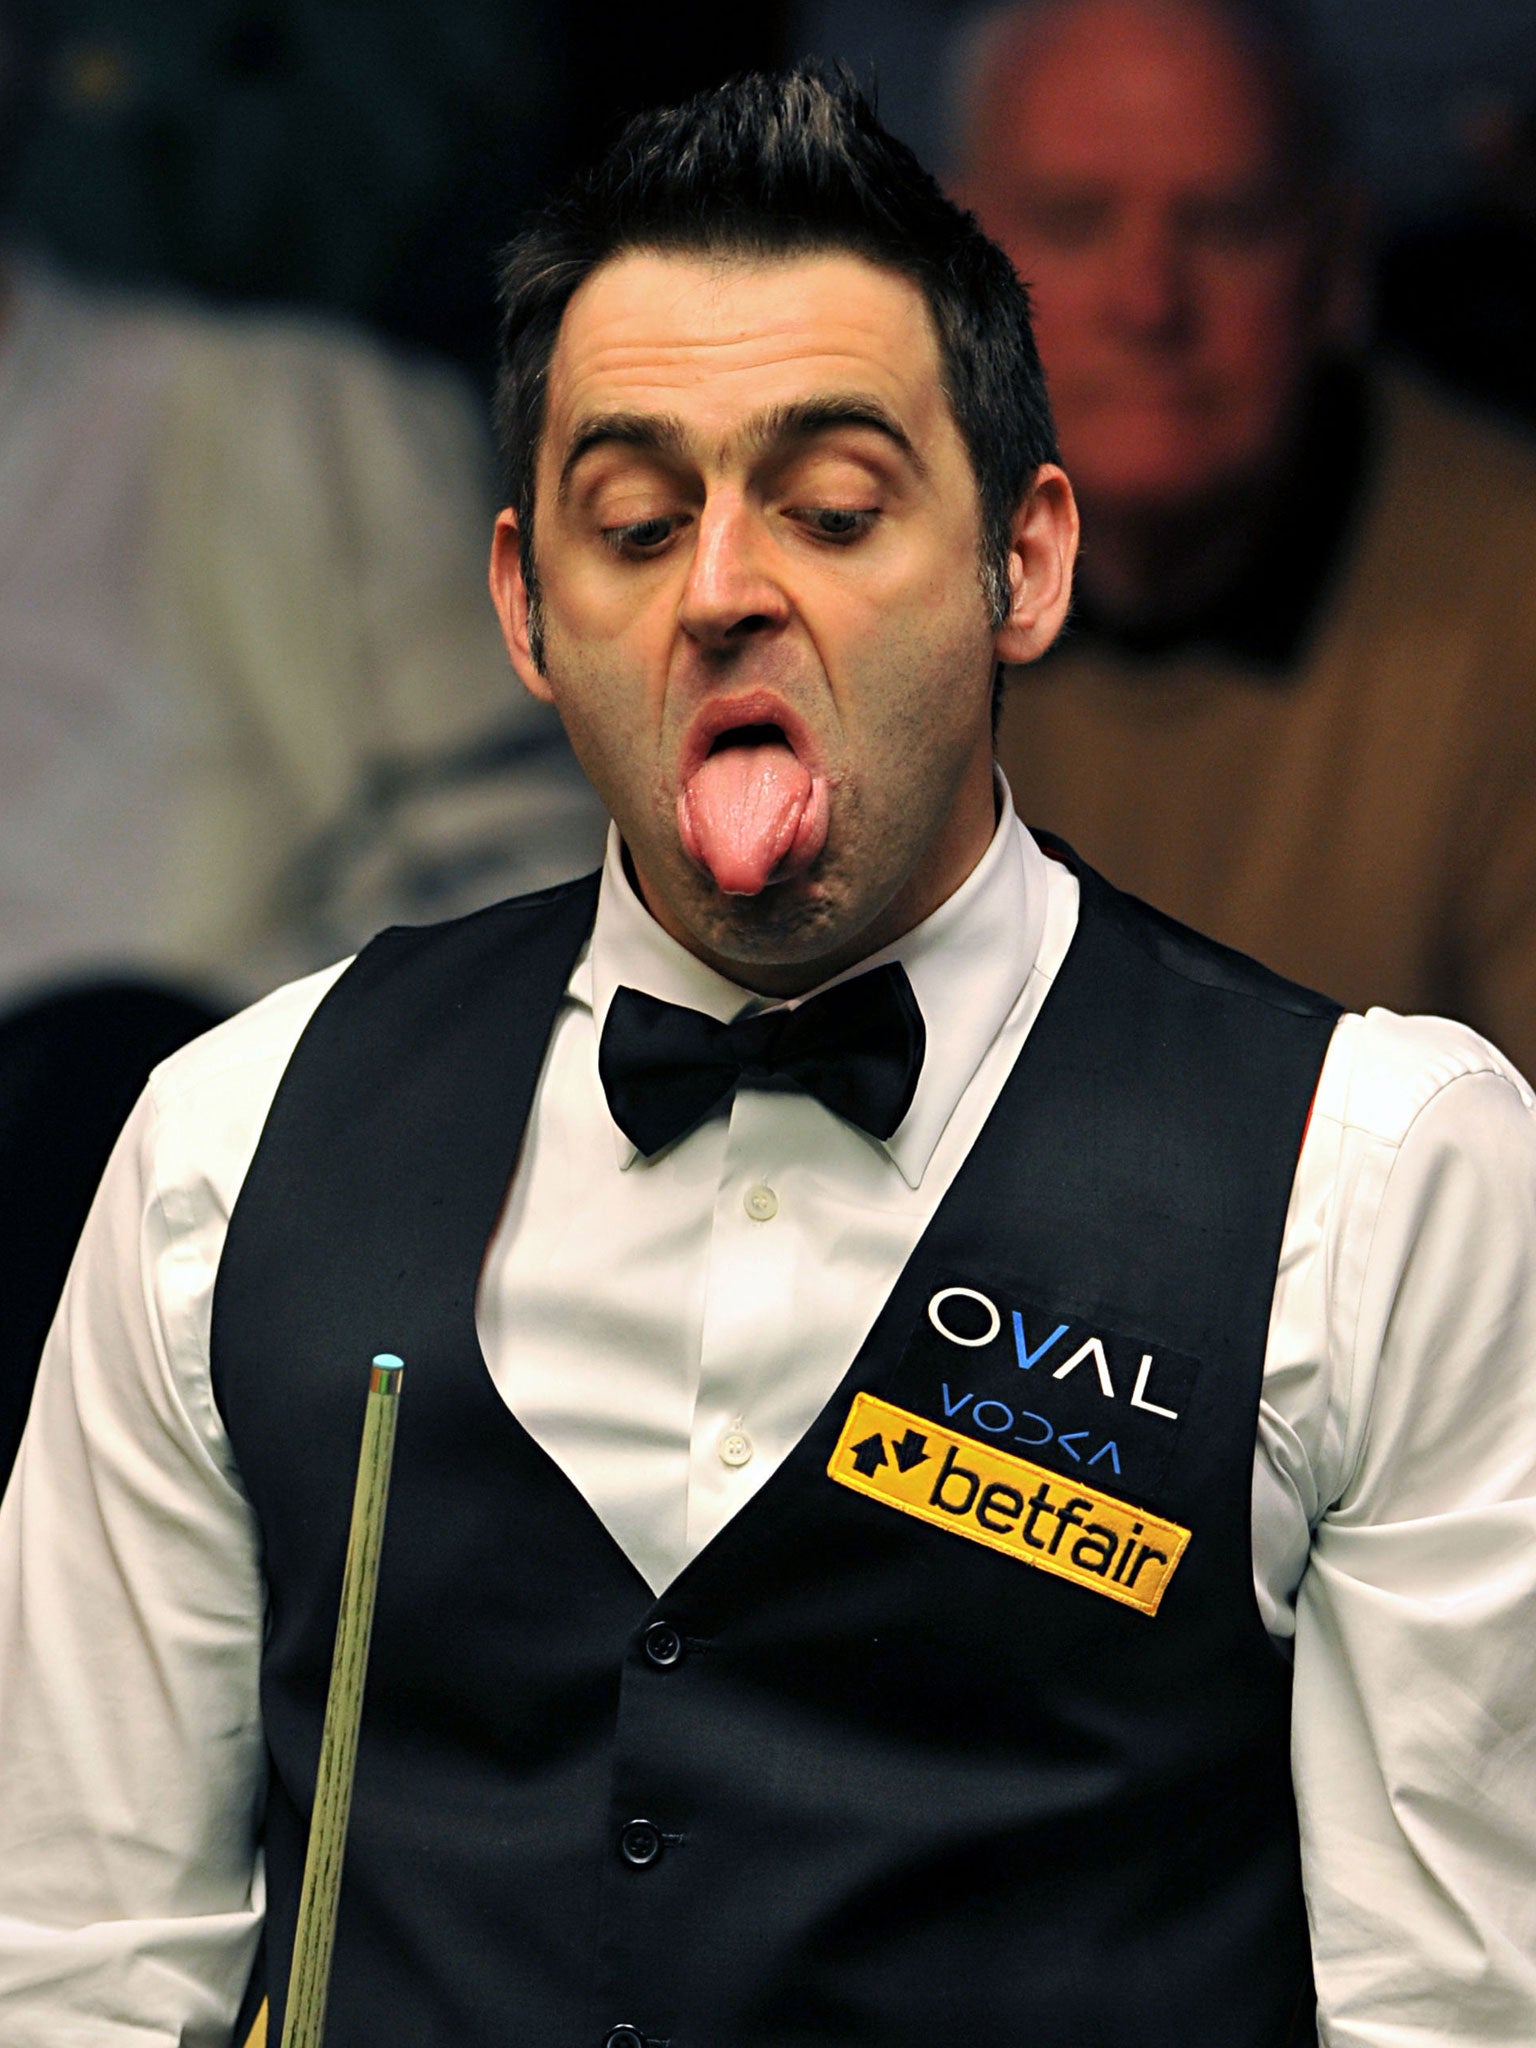 Snooker loopy: Ronnie O’Sullivan pulls some animated faces during his match against Marcus Campbell yesterday